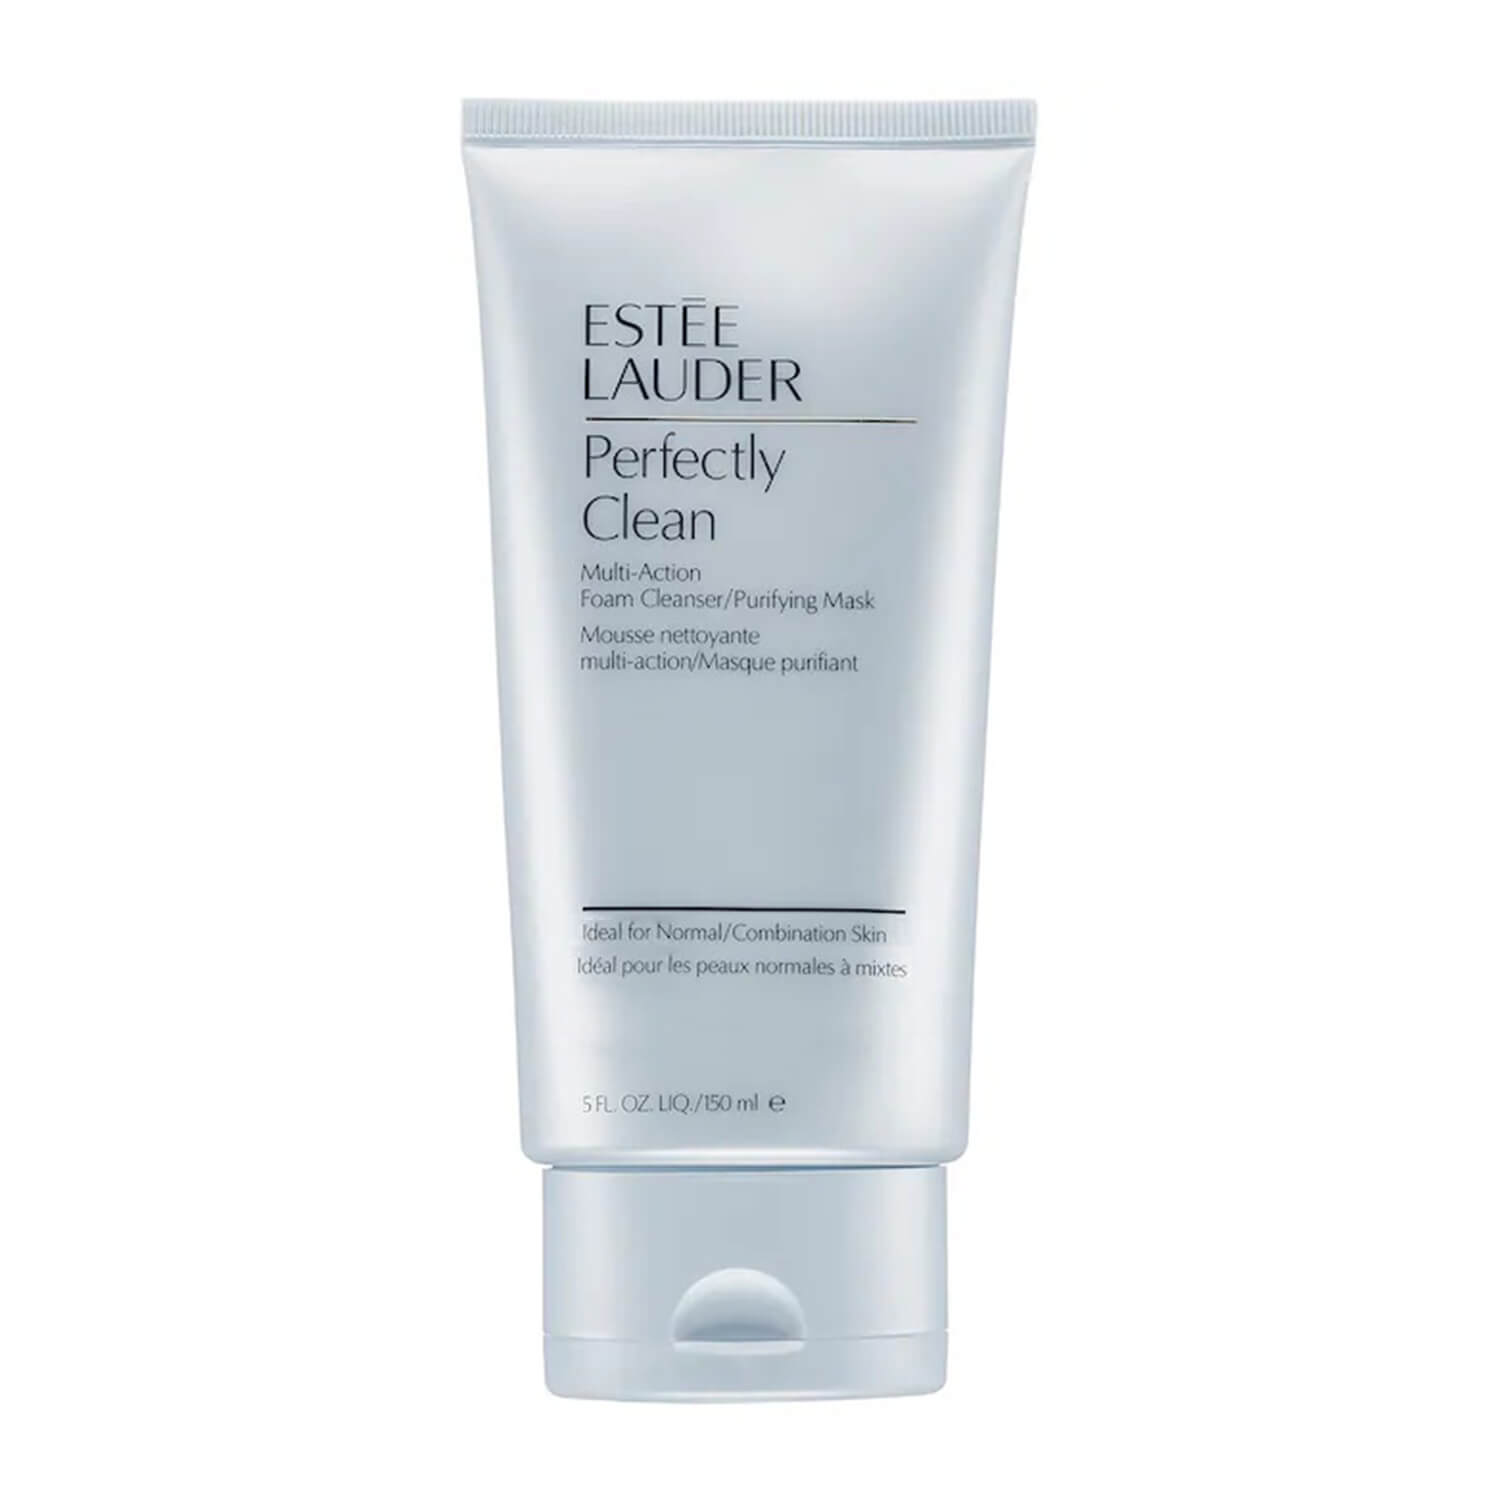 shop Estee Lauder perfectly clean cleanser available at Heygirl.pk for delivery in Pakistan